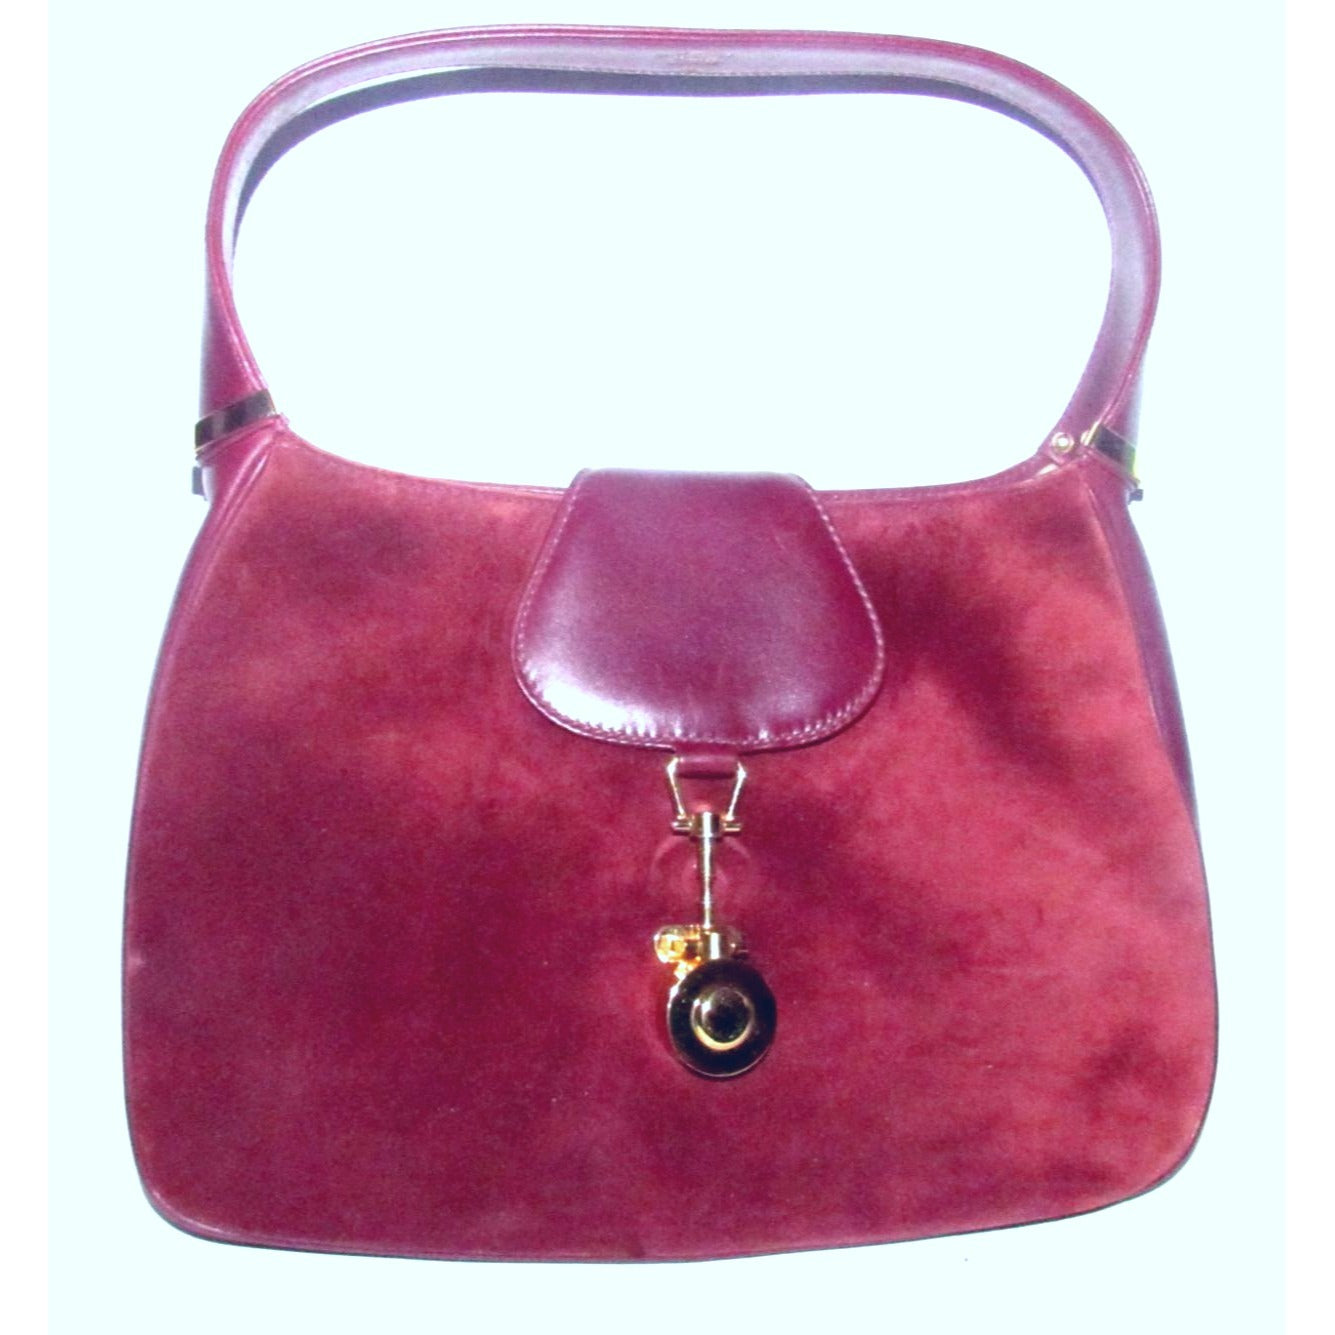 Rare, vintage, Gucci, burgundy leather & suede, unique, 1961 Jackie, hobo style shoulder bag with a two-tone piston closure & flap top